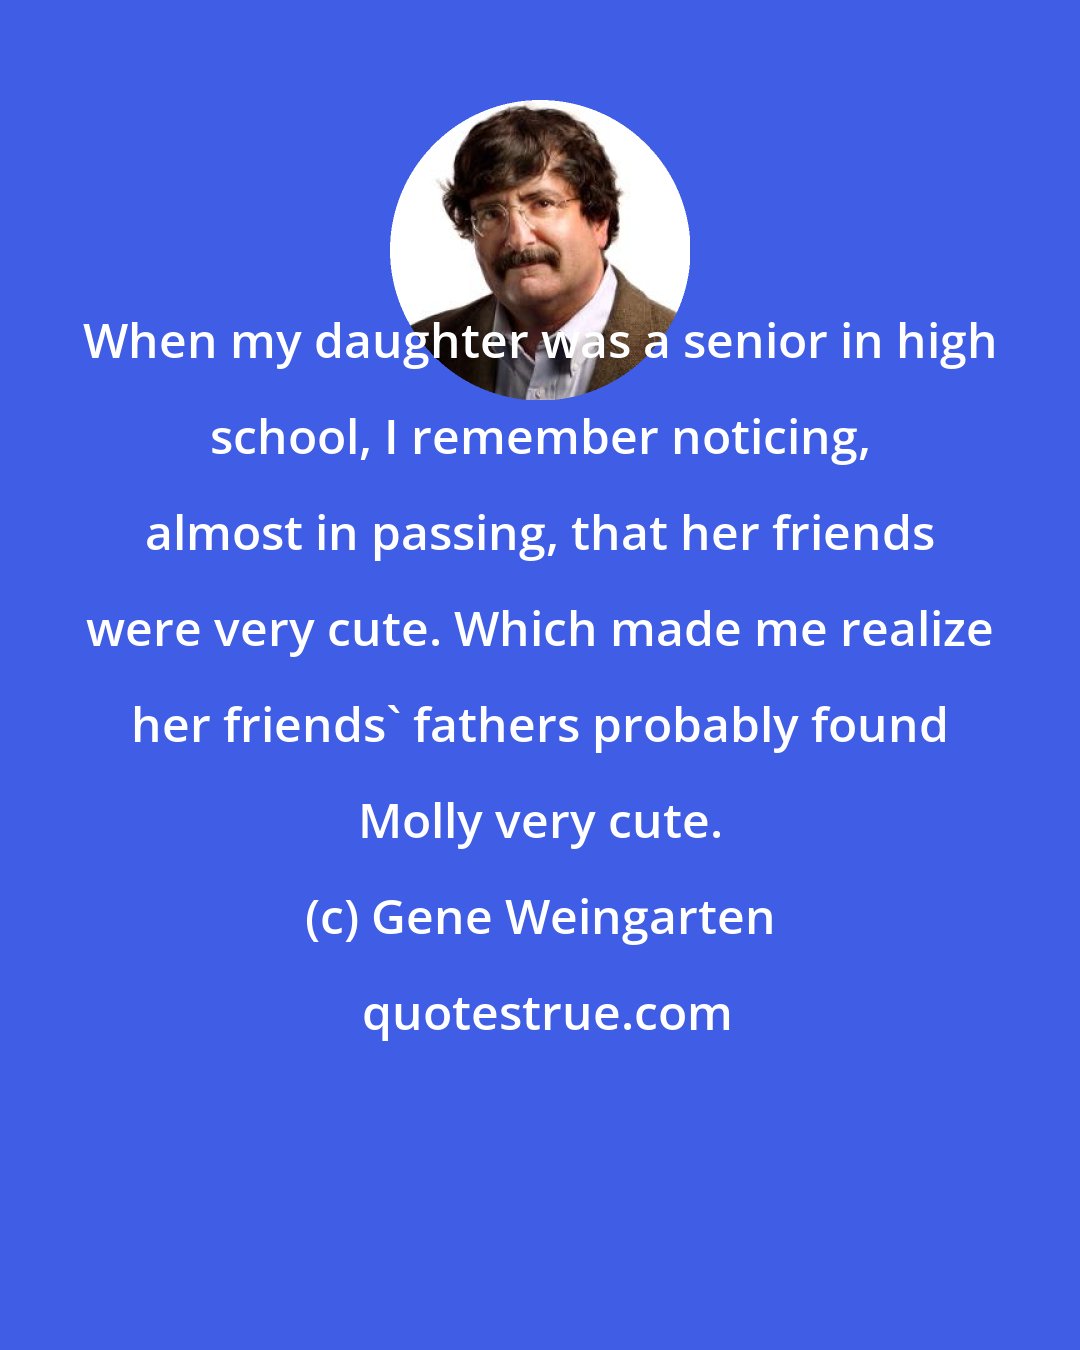 Gene Weingarten: When my daughter was a senior in high school, I remember noticing, almost in passing, that her friends were very cute. Which made me realize her friends' fathers probably found Molly very cute.